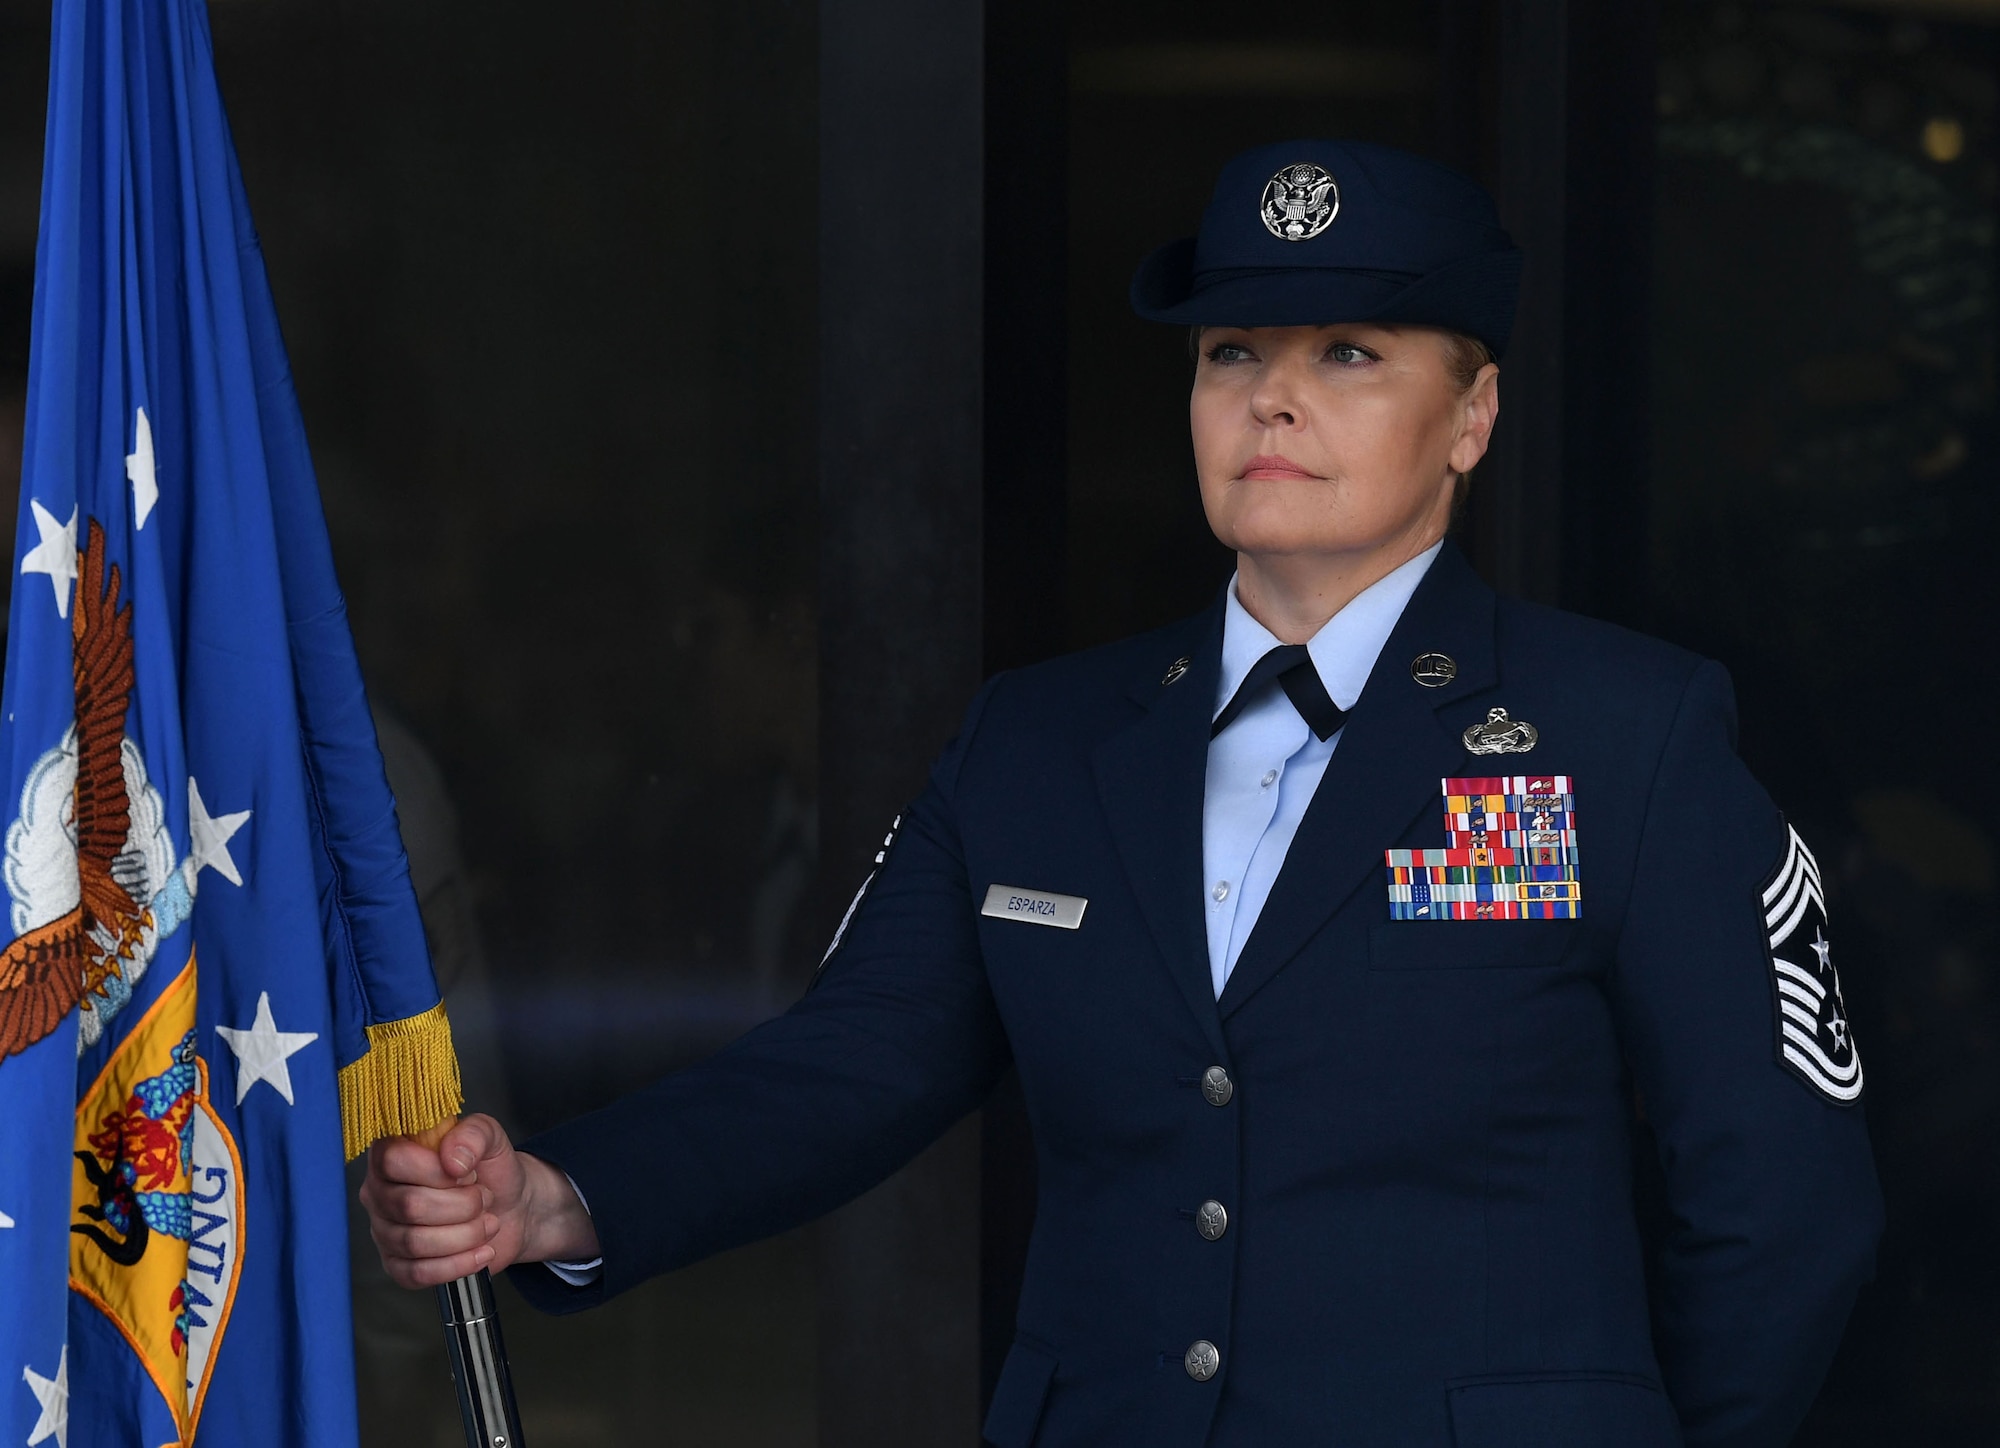 U.S. Air Force Chief Master Sgt. Sarah Esparza, 81st Training Wing command chief, holds the guidon during the 81st TRW assumption of command ceremony on the Levitow Training Support Facility drill pad at Keesler Air Force Base, Mississippi, March 23, 2023.